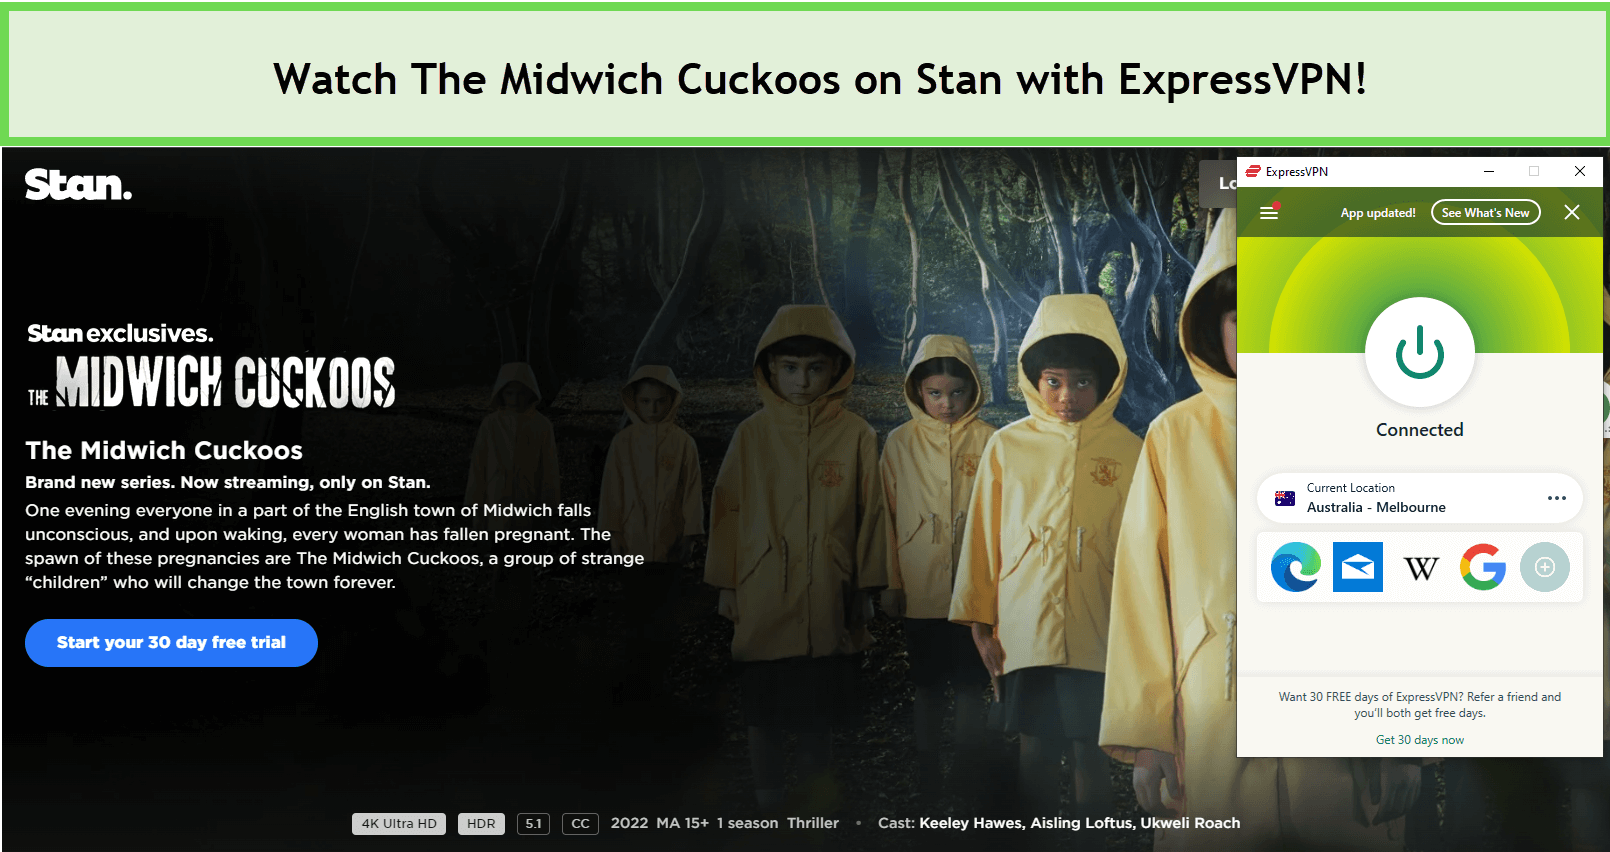 Watch-The-Midwich-Cuckoos-in-Hong Kong-on-Stan-with-ExpressVPN